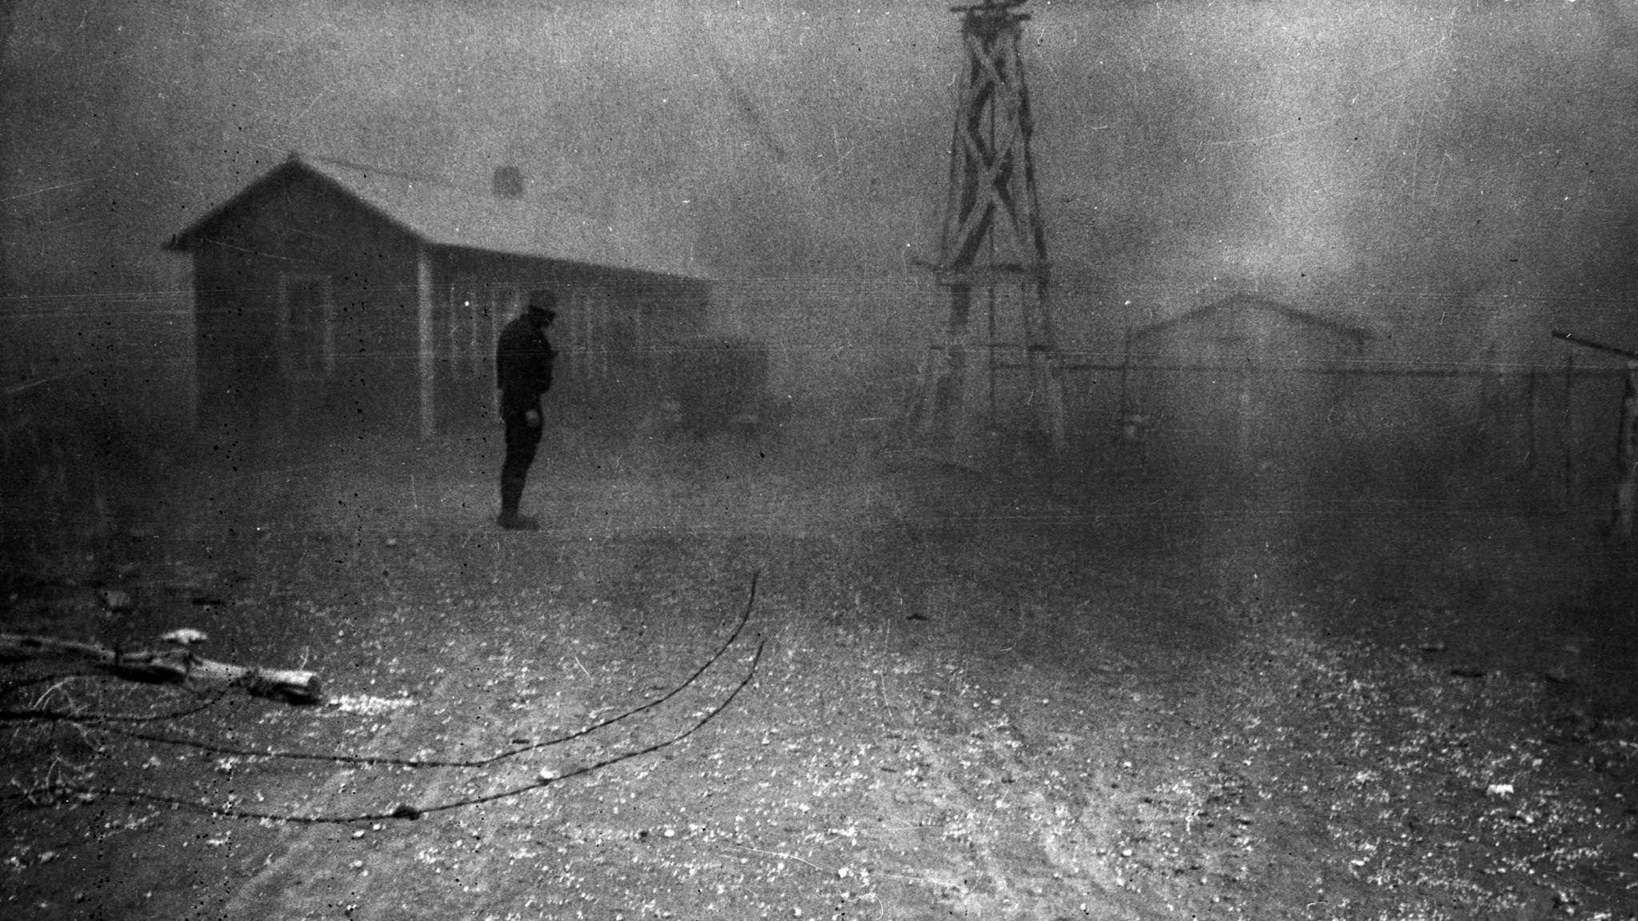 A dust storm. Conditions like these forced many farmers to abandon the area. New Mexico, 1930s